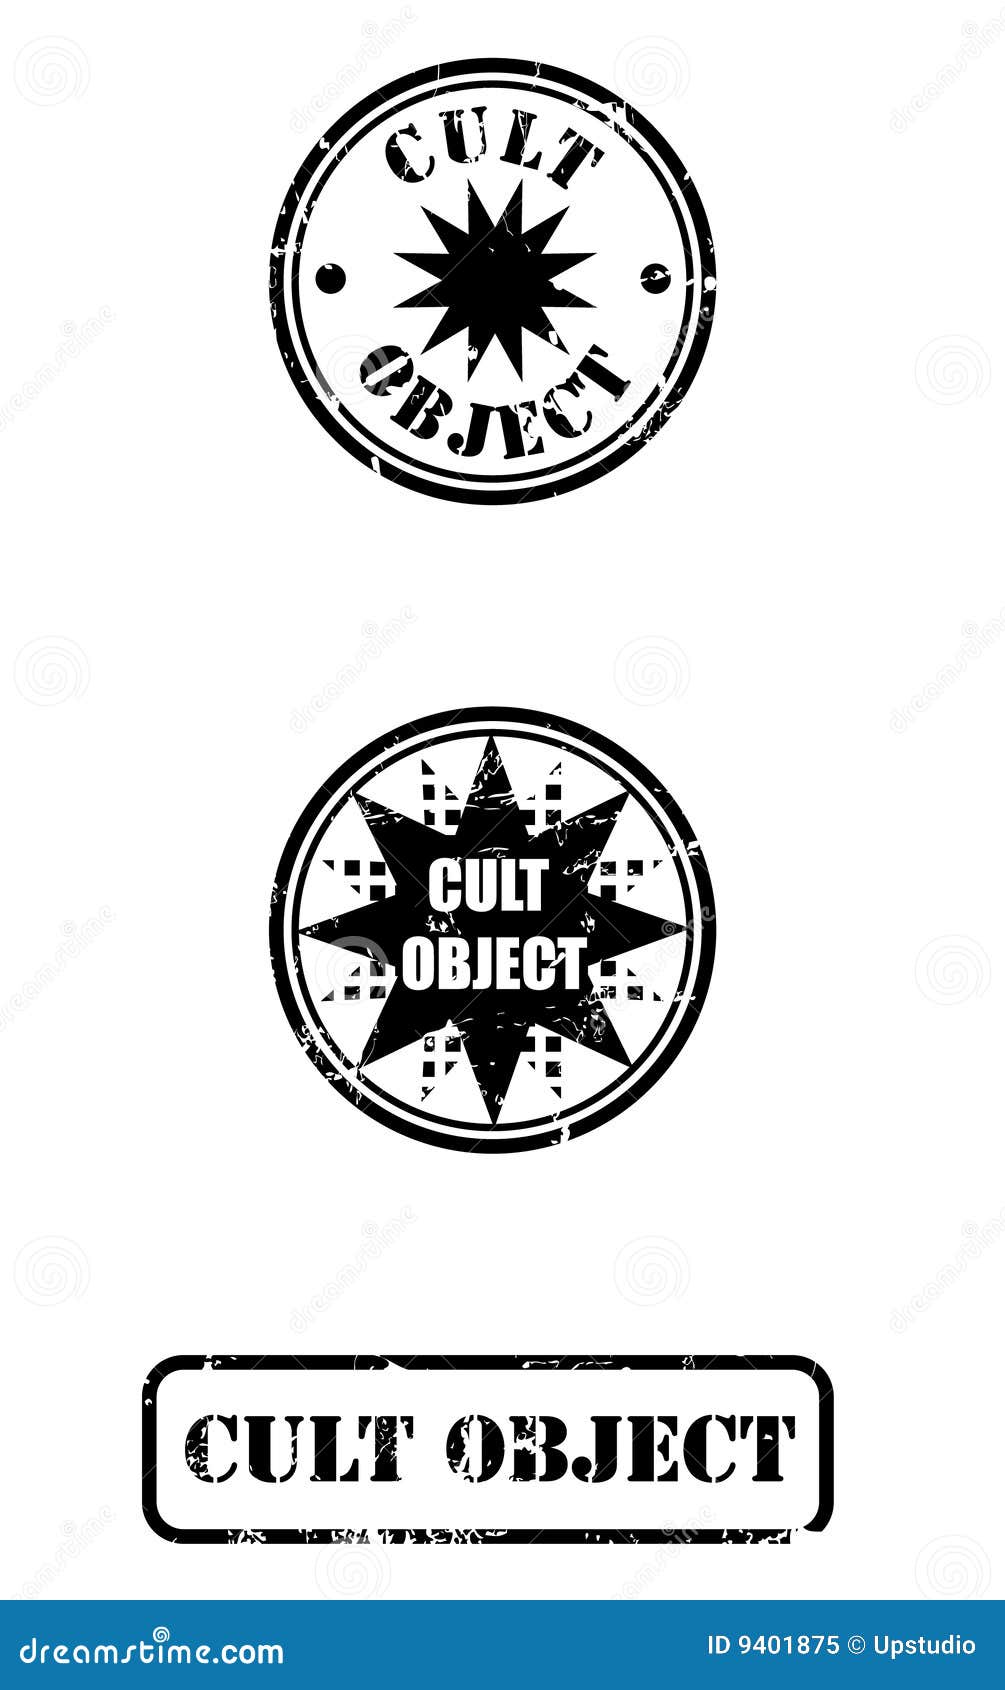 cult object stamps